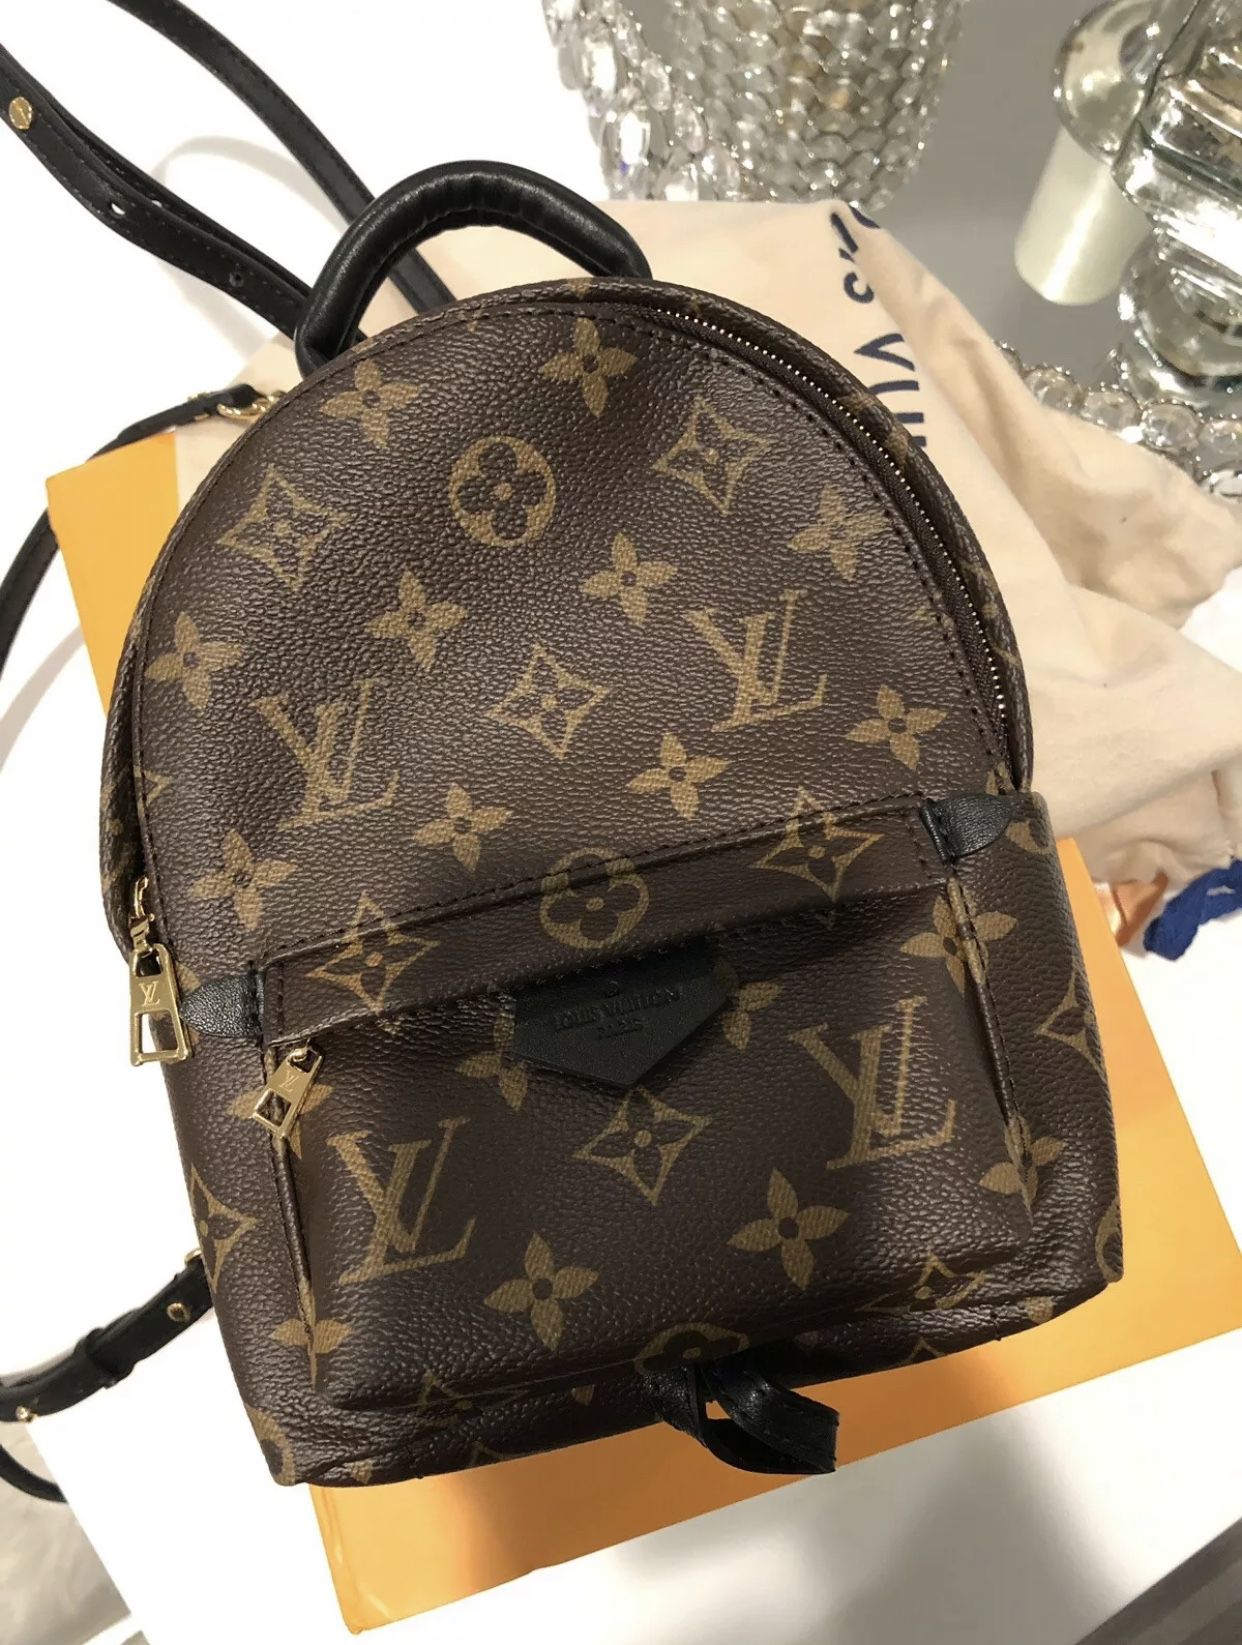 Luis Vuitton Palm Spring Mini Reverse Monogram W Pouch for Sale in  Dunwoody, GA - OfferUp